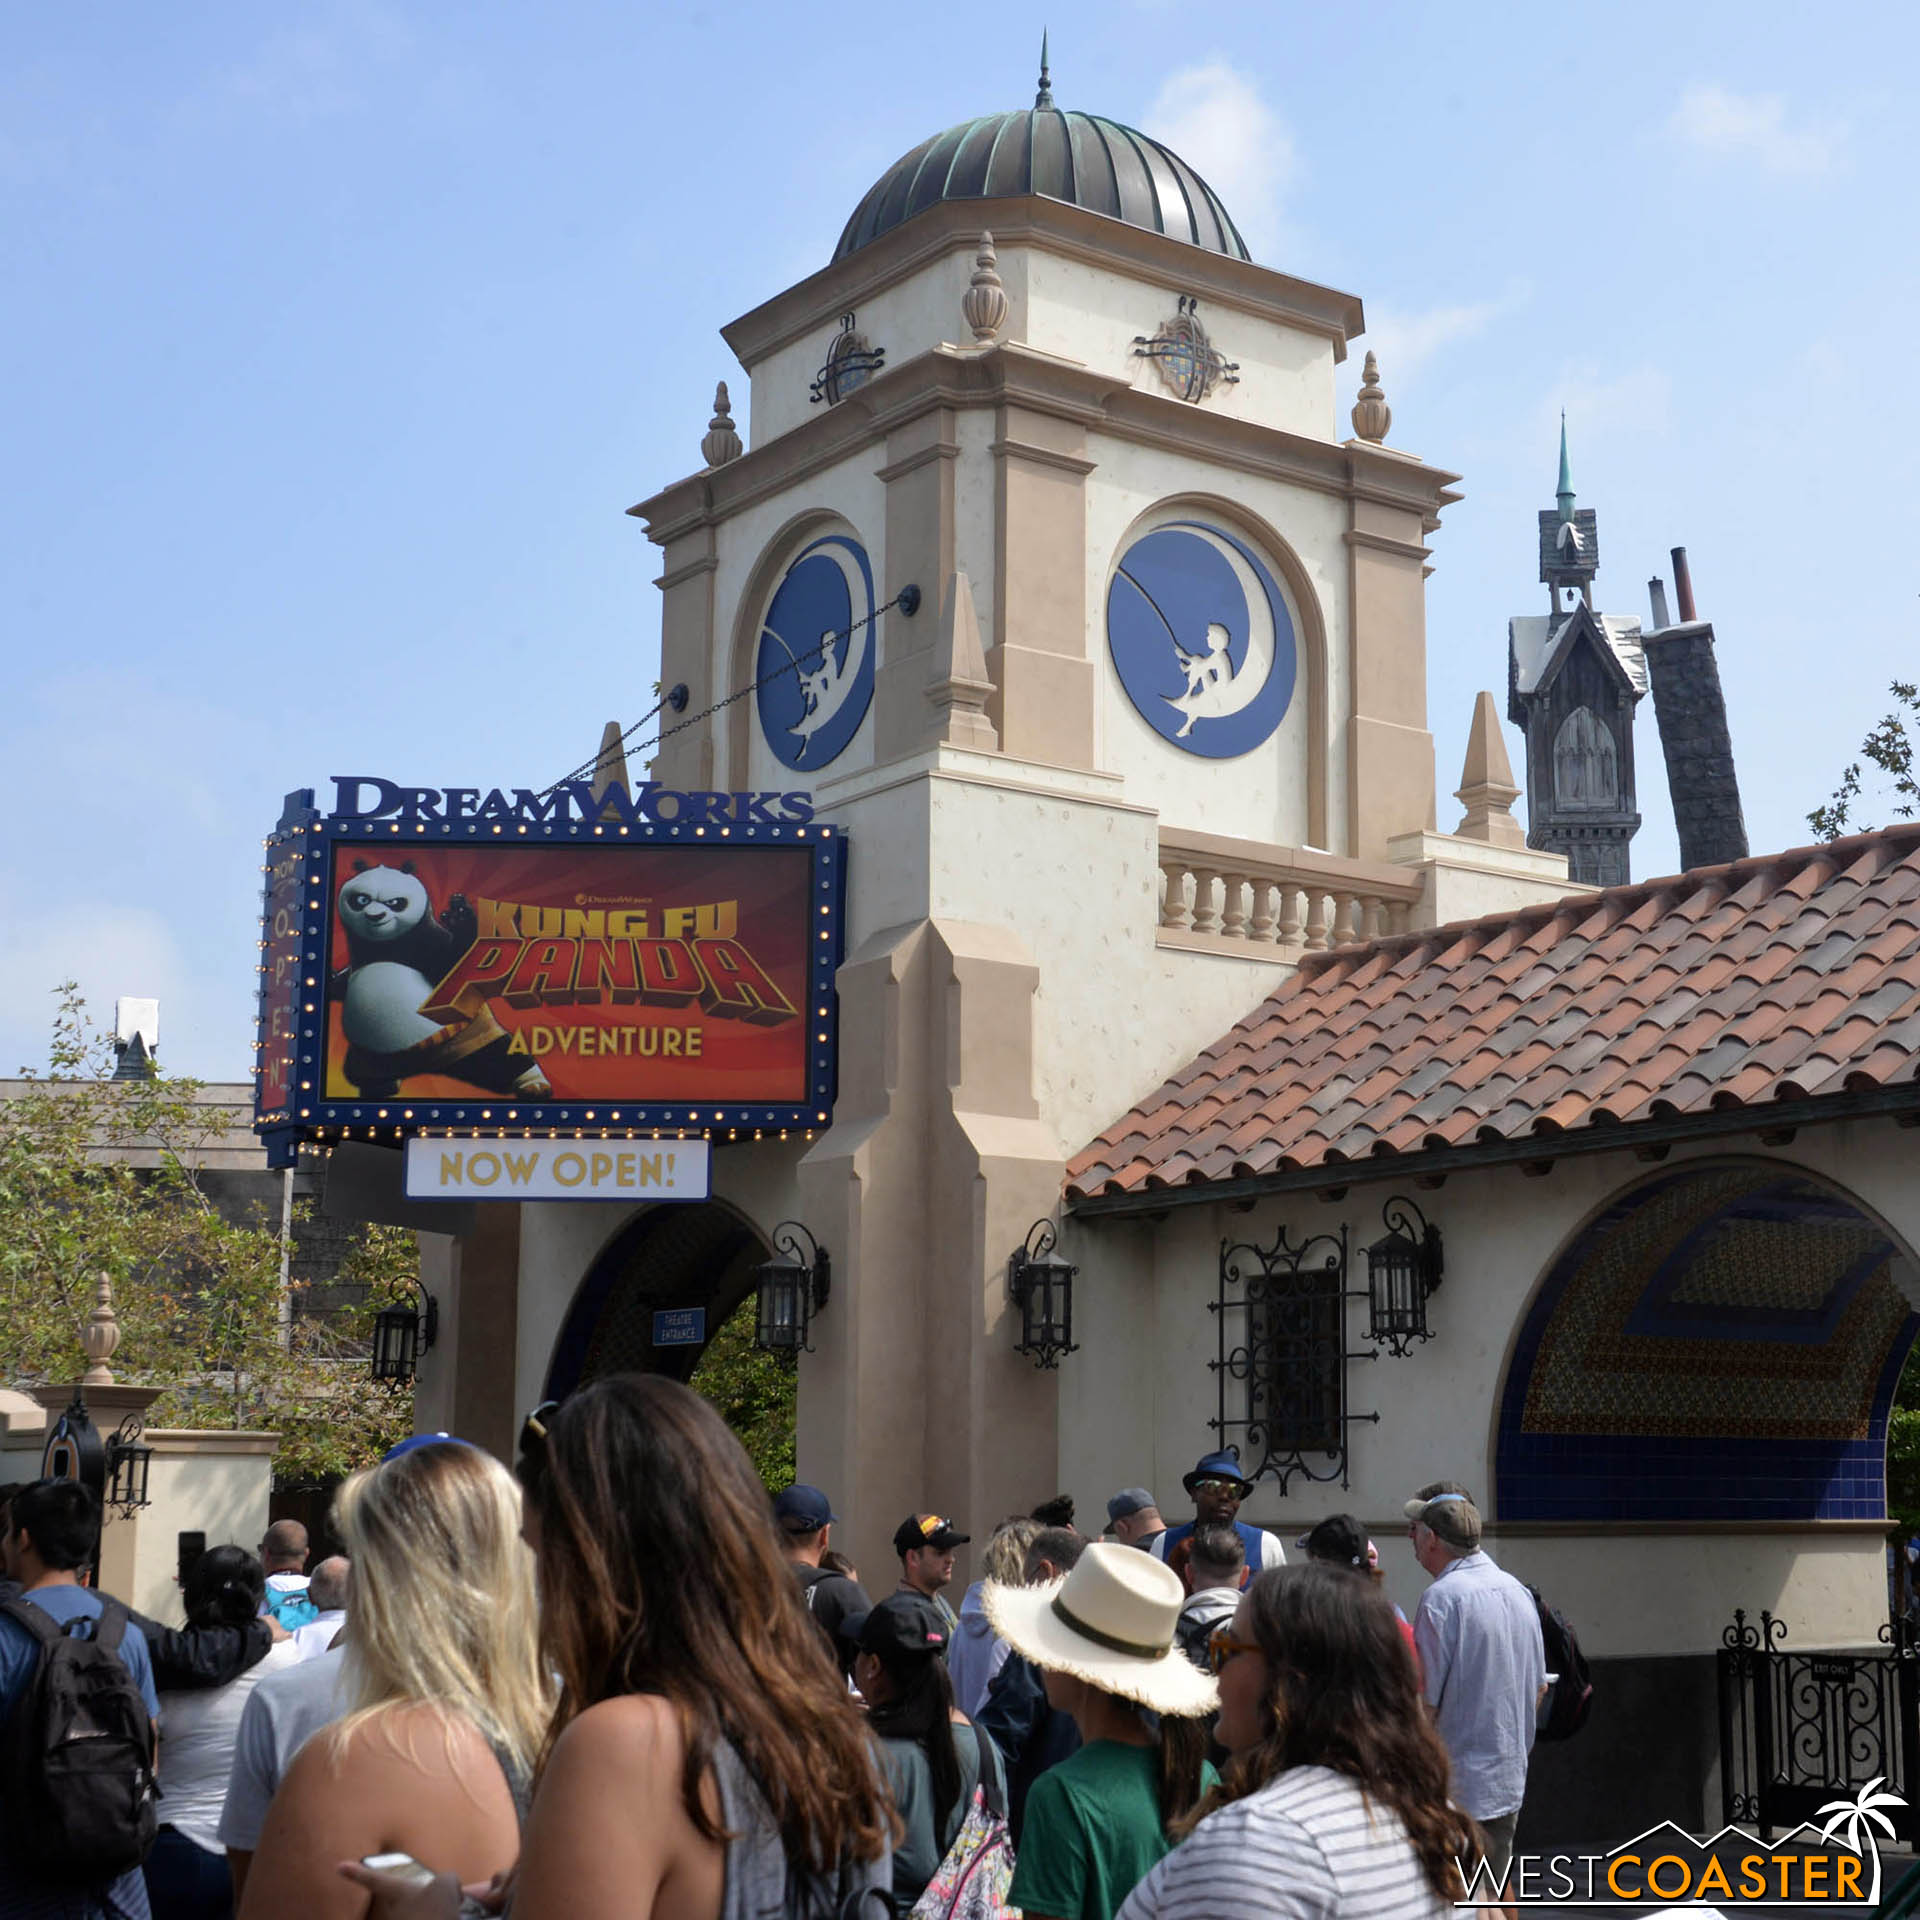  This is an overhaul of the former Shrek 4D show, and it can be configured to get an updated cinematic attraction as market trends see fit. 